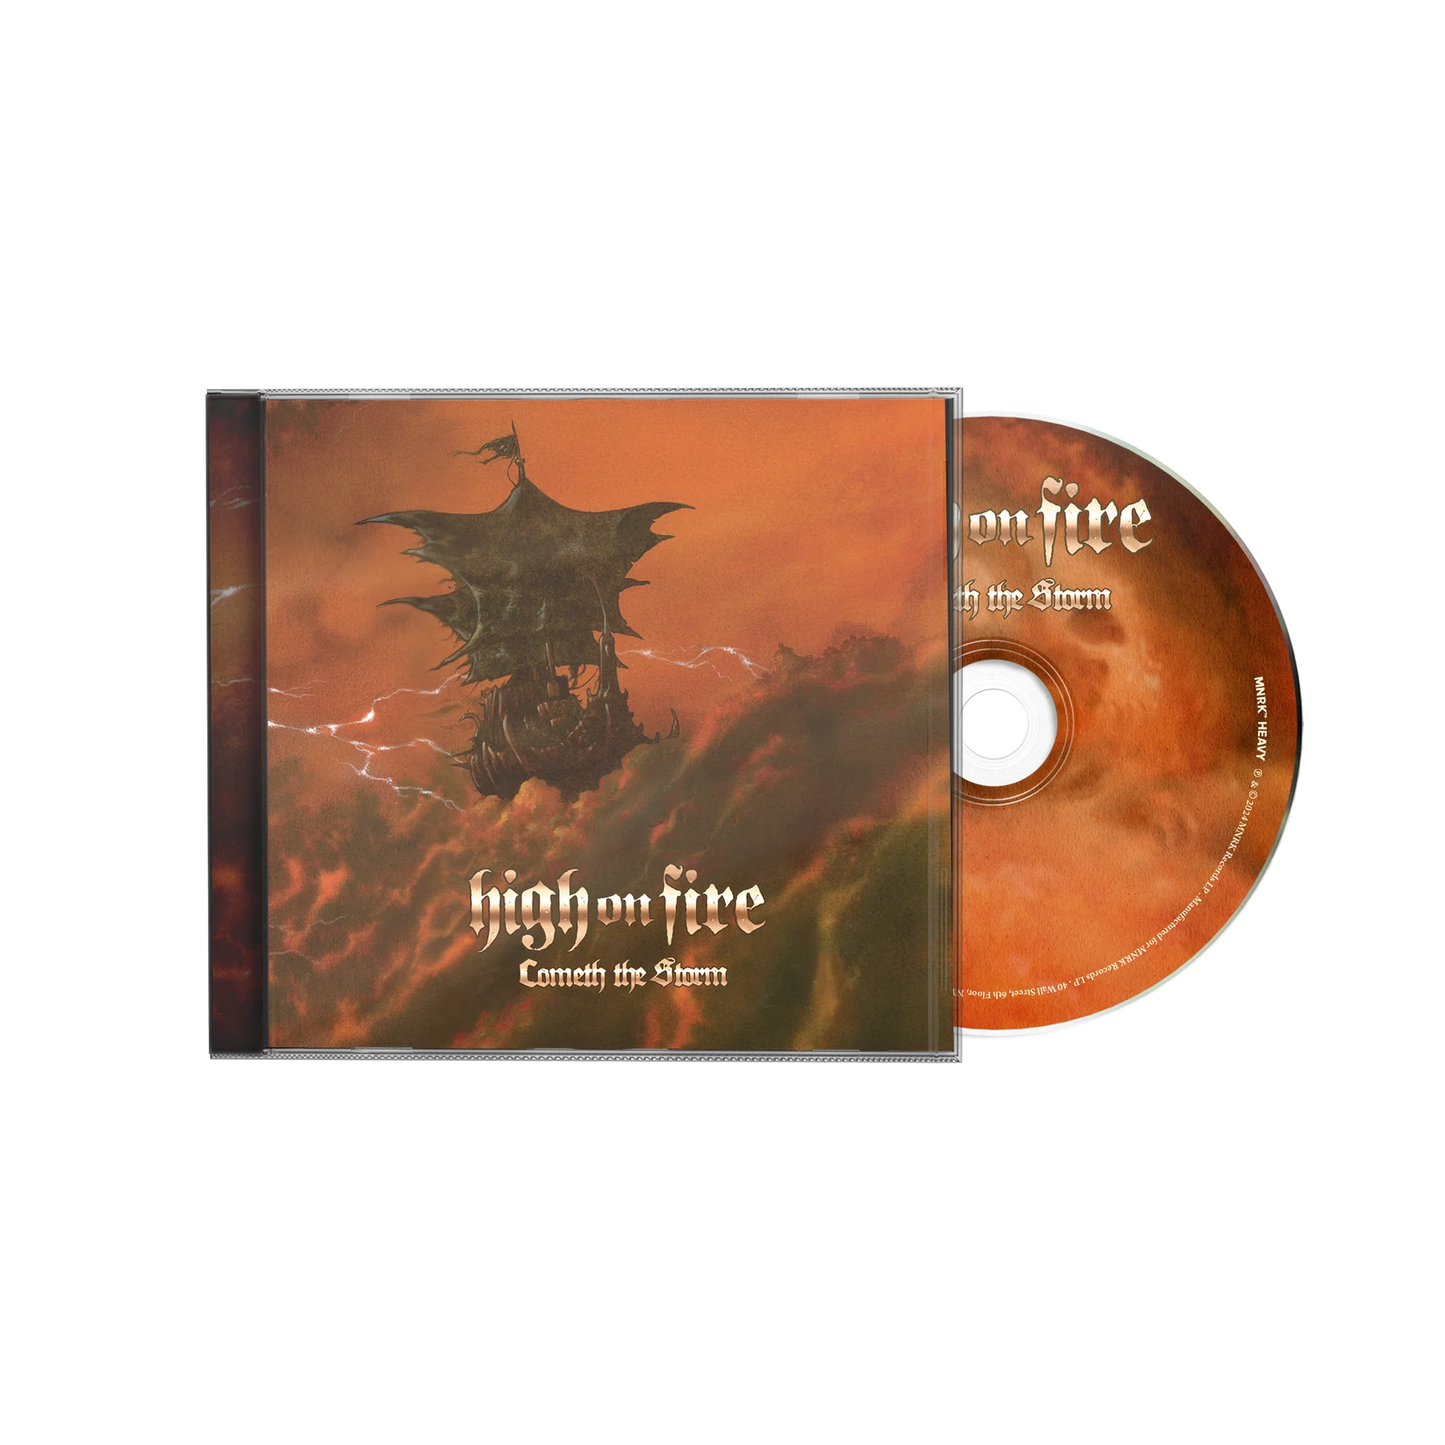 HIGH ON FIRE - Cometh The Storm CD (PREORDER)